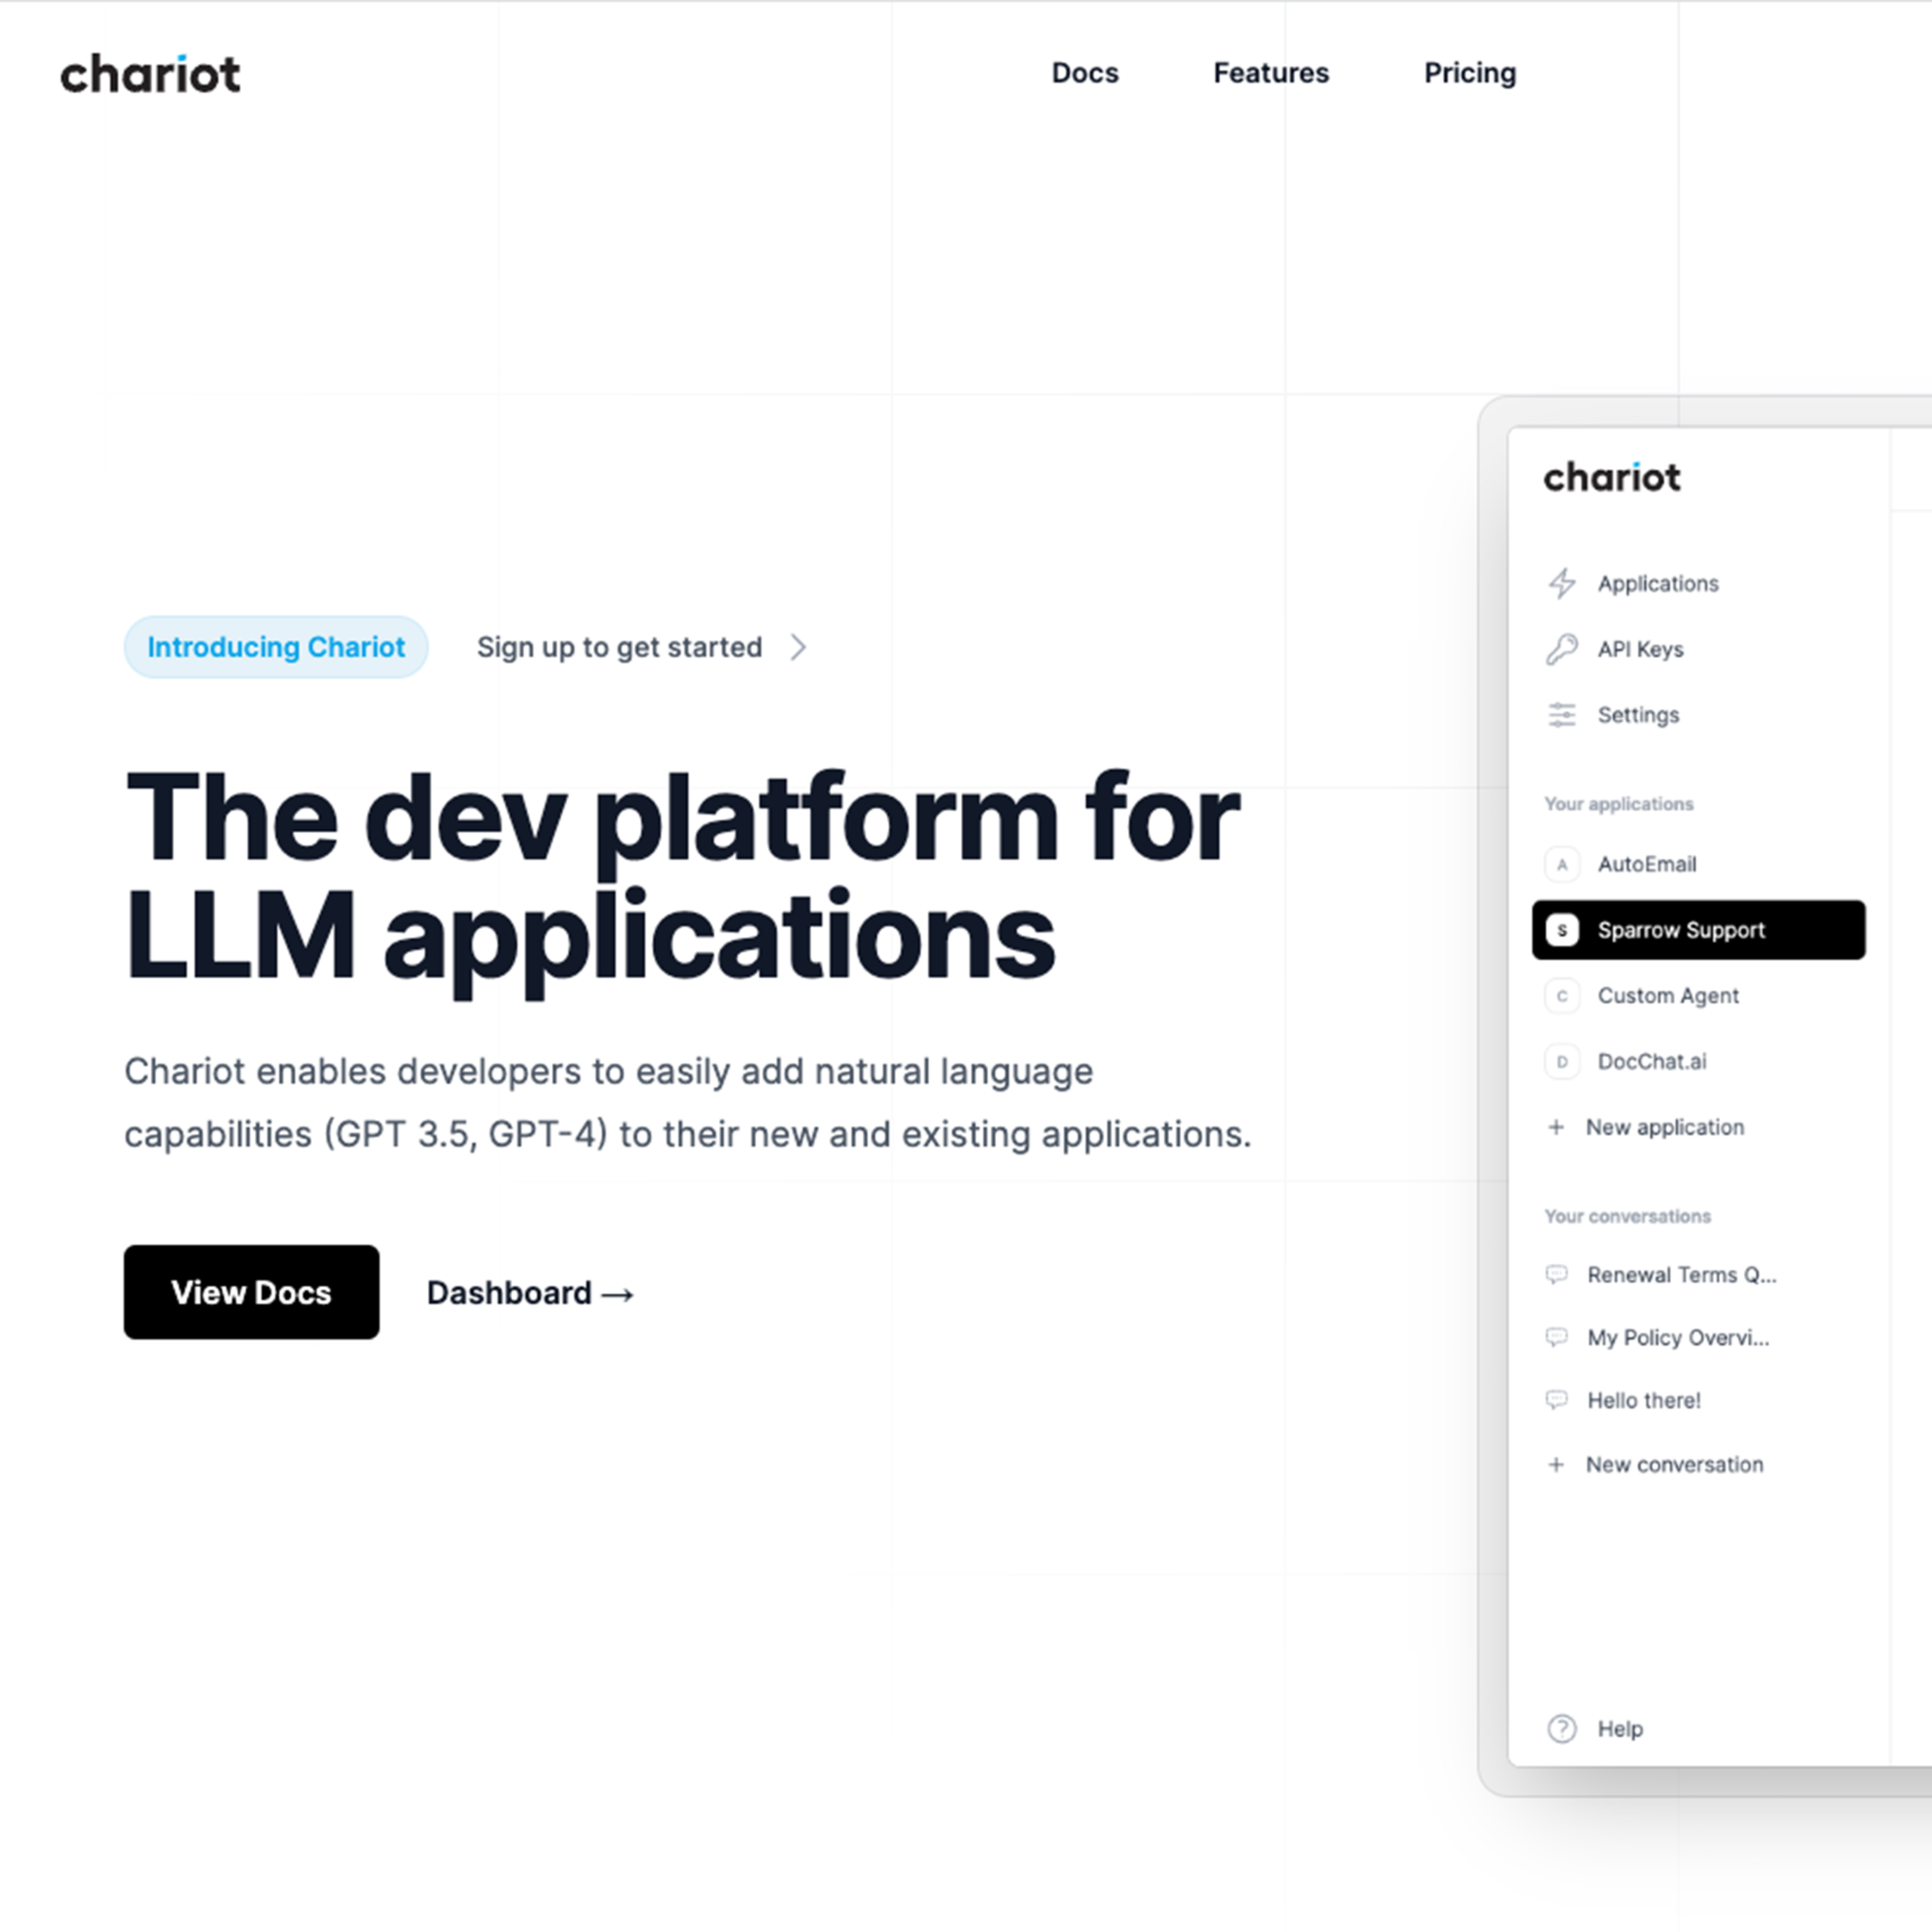 Chariot - A platform for developers to add natural language capabilities to applications